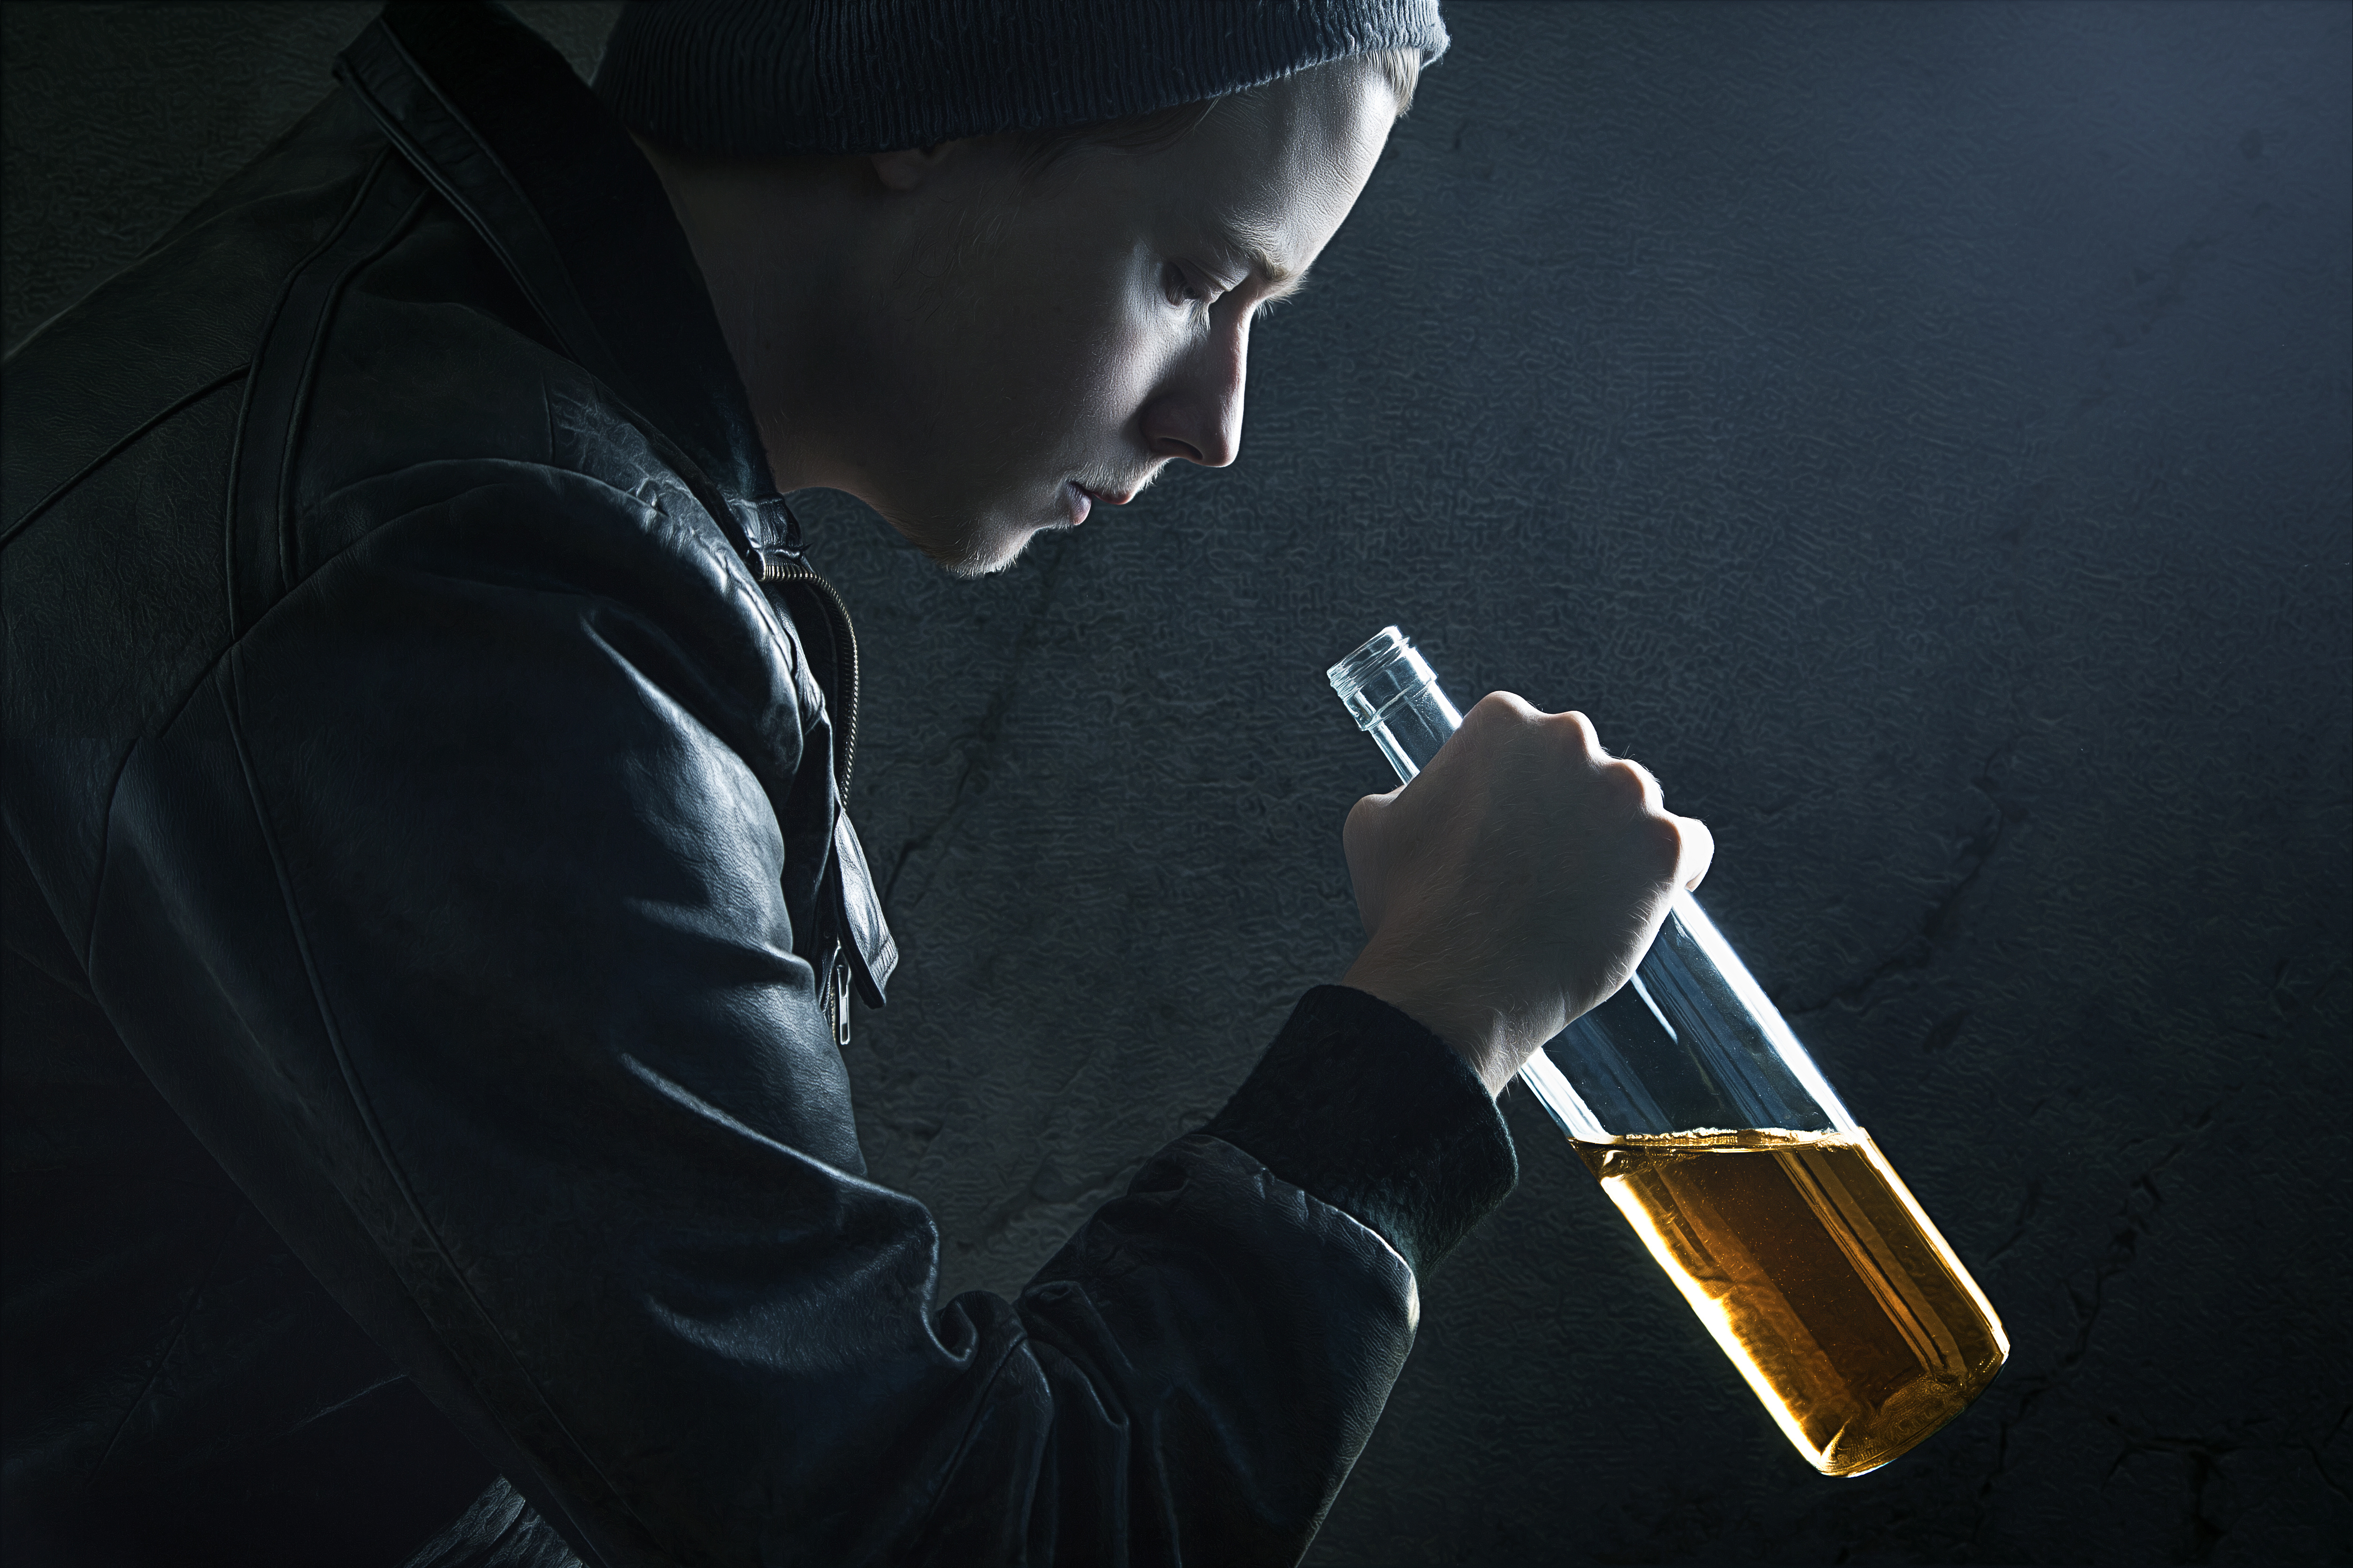 Helping a teen get back on track -teen alcohol addict preparing to take a drink